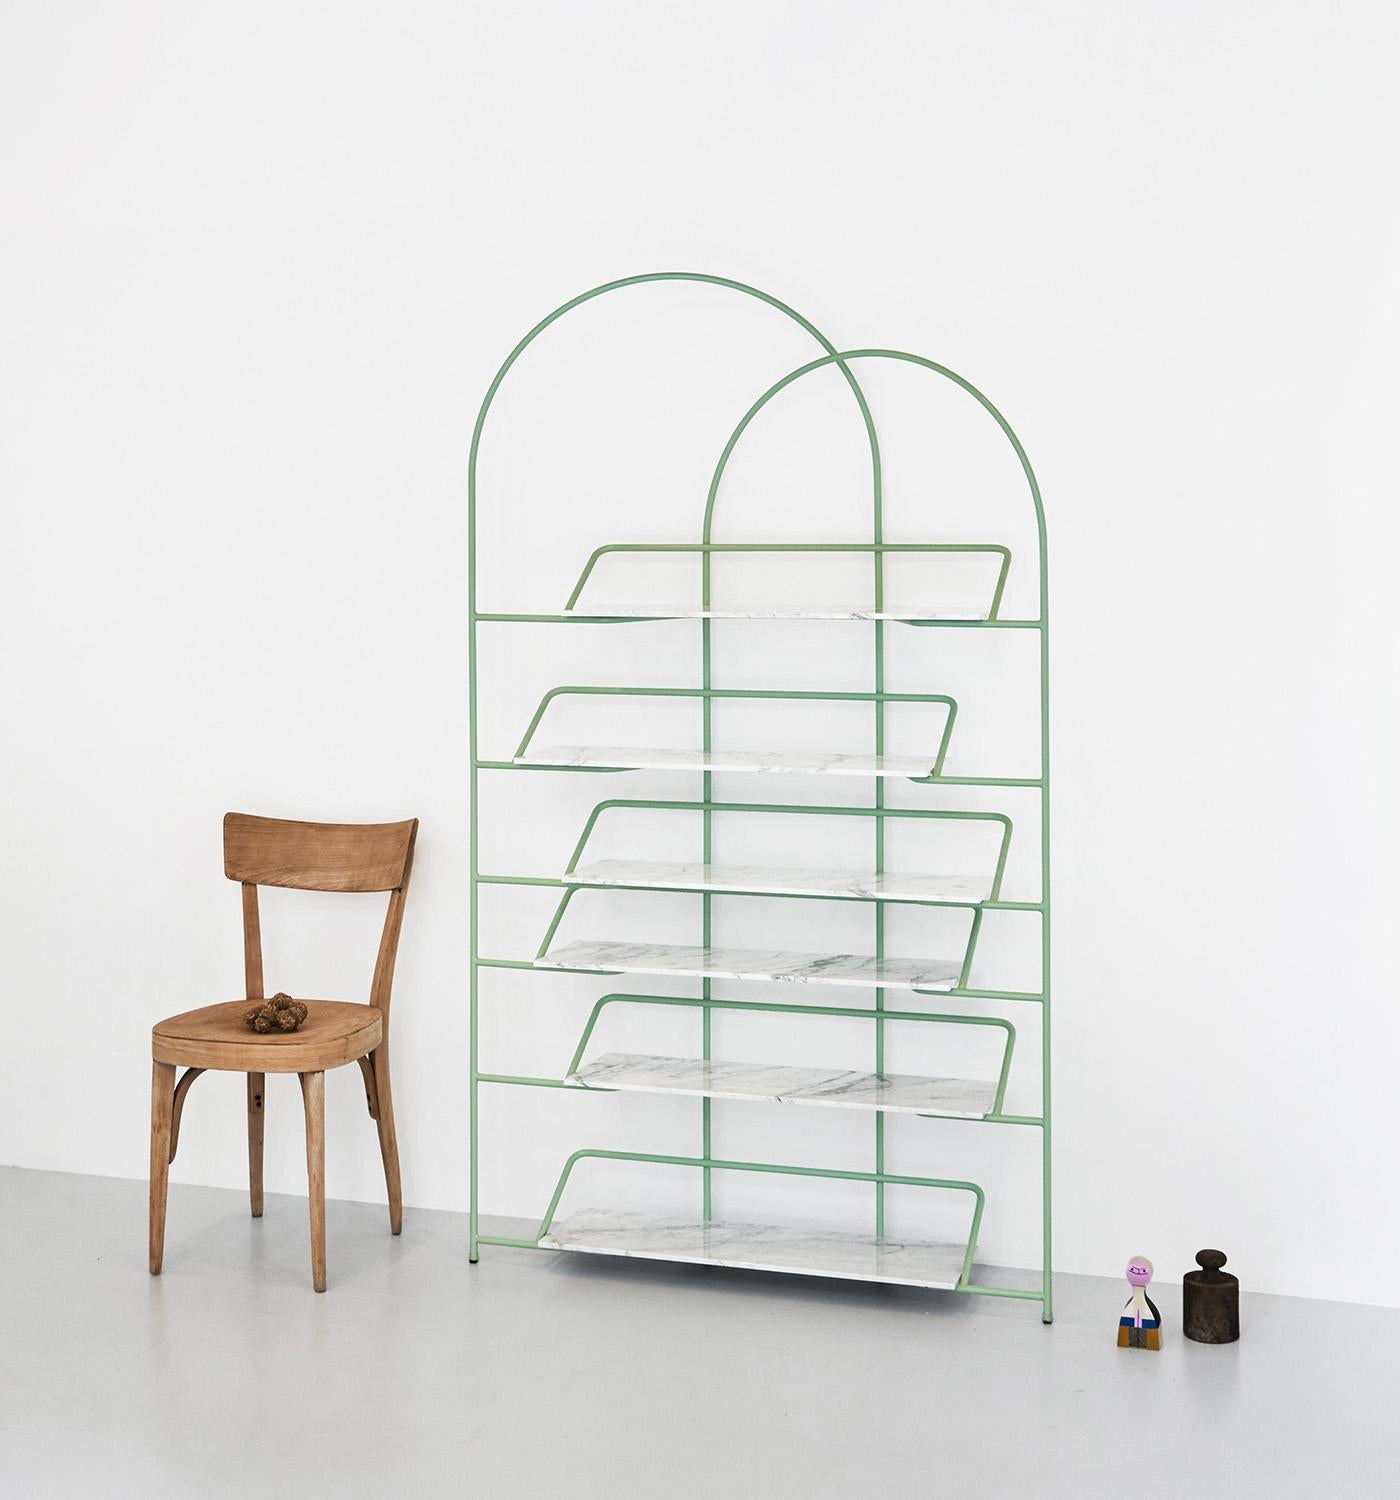 Two arches enclose and enhance stacks of books gently suspended from a light and resistant structure. 
Designed by Enrico Girotti for lapiegaWD LateB is a sculptural bookcase available in a painted or galvanized finish. The shelves are available in